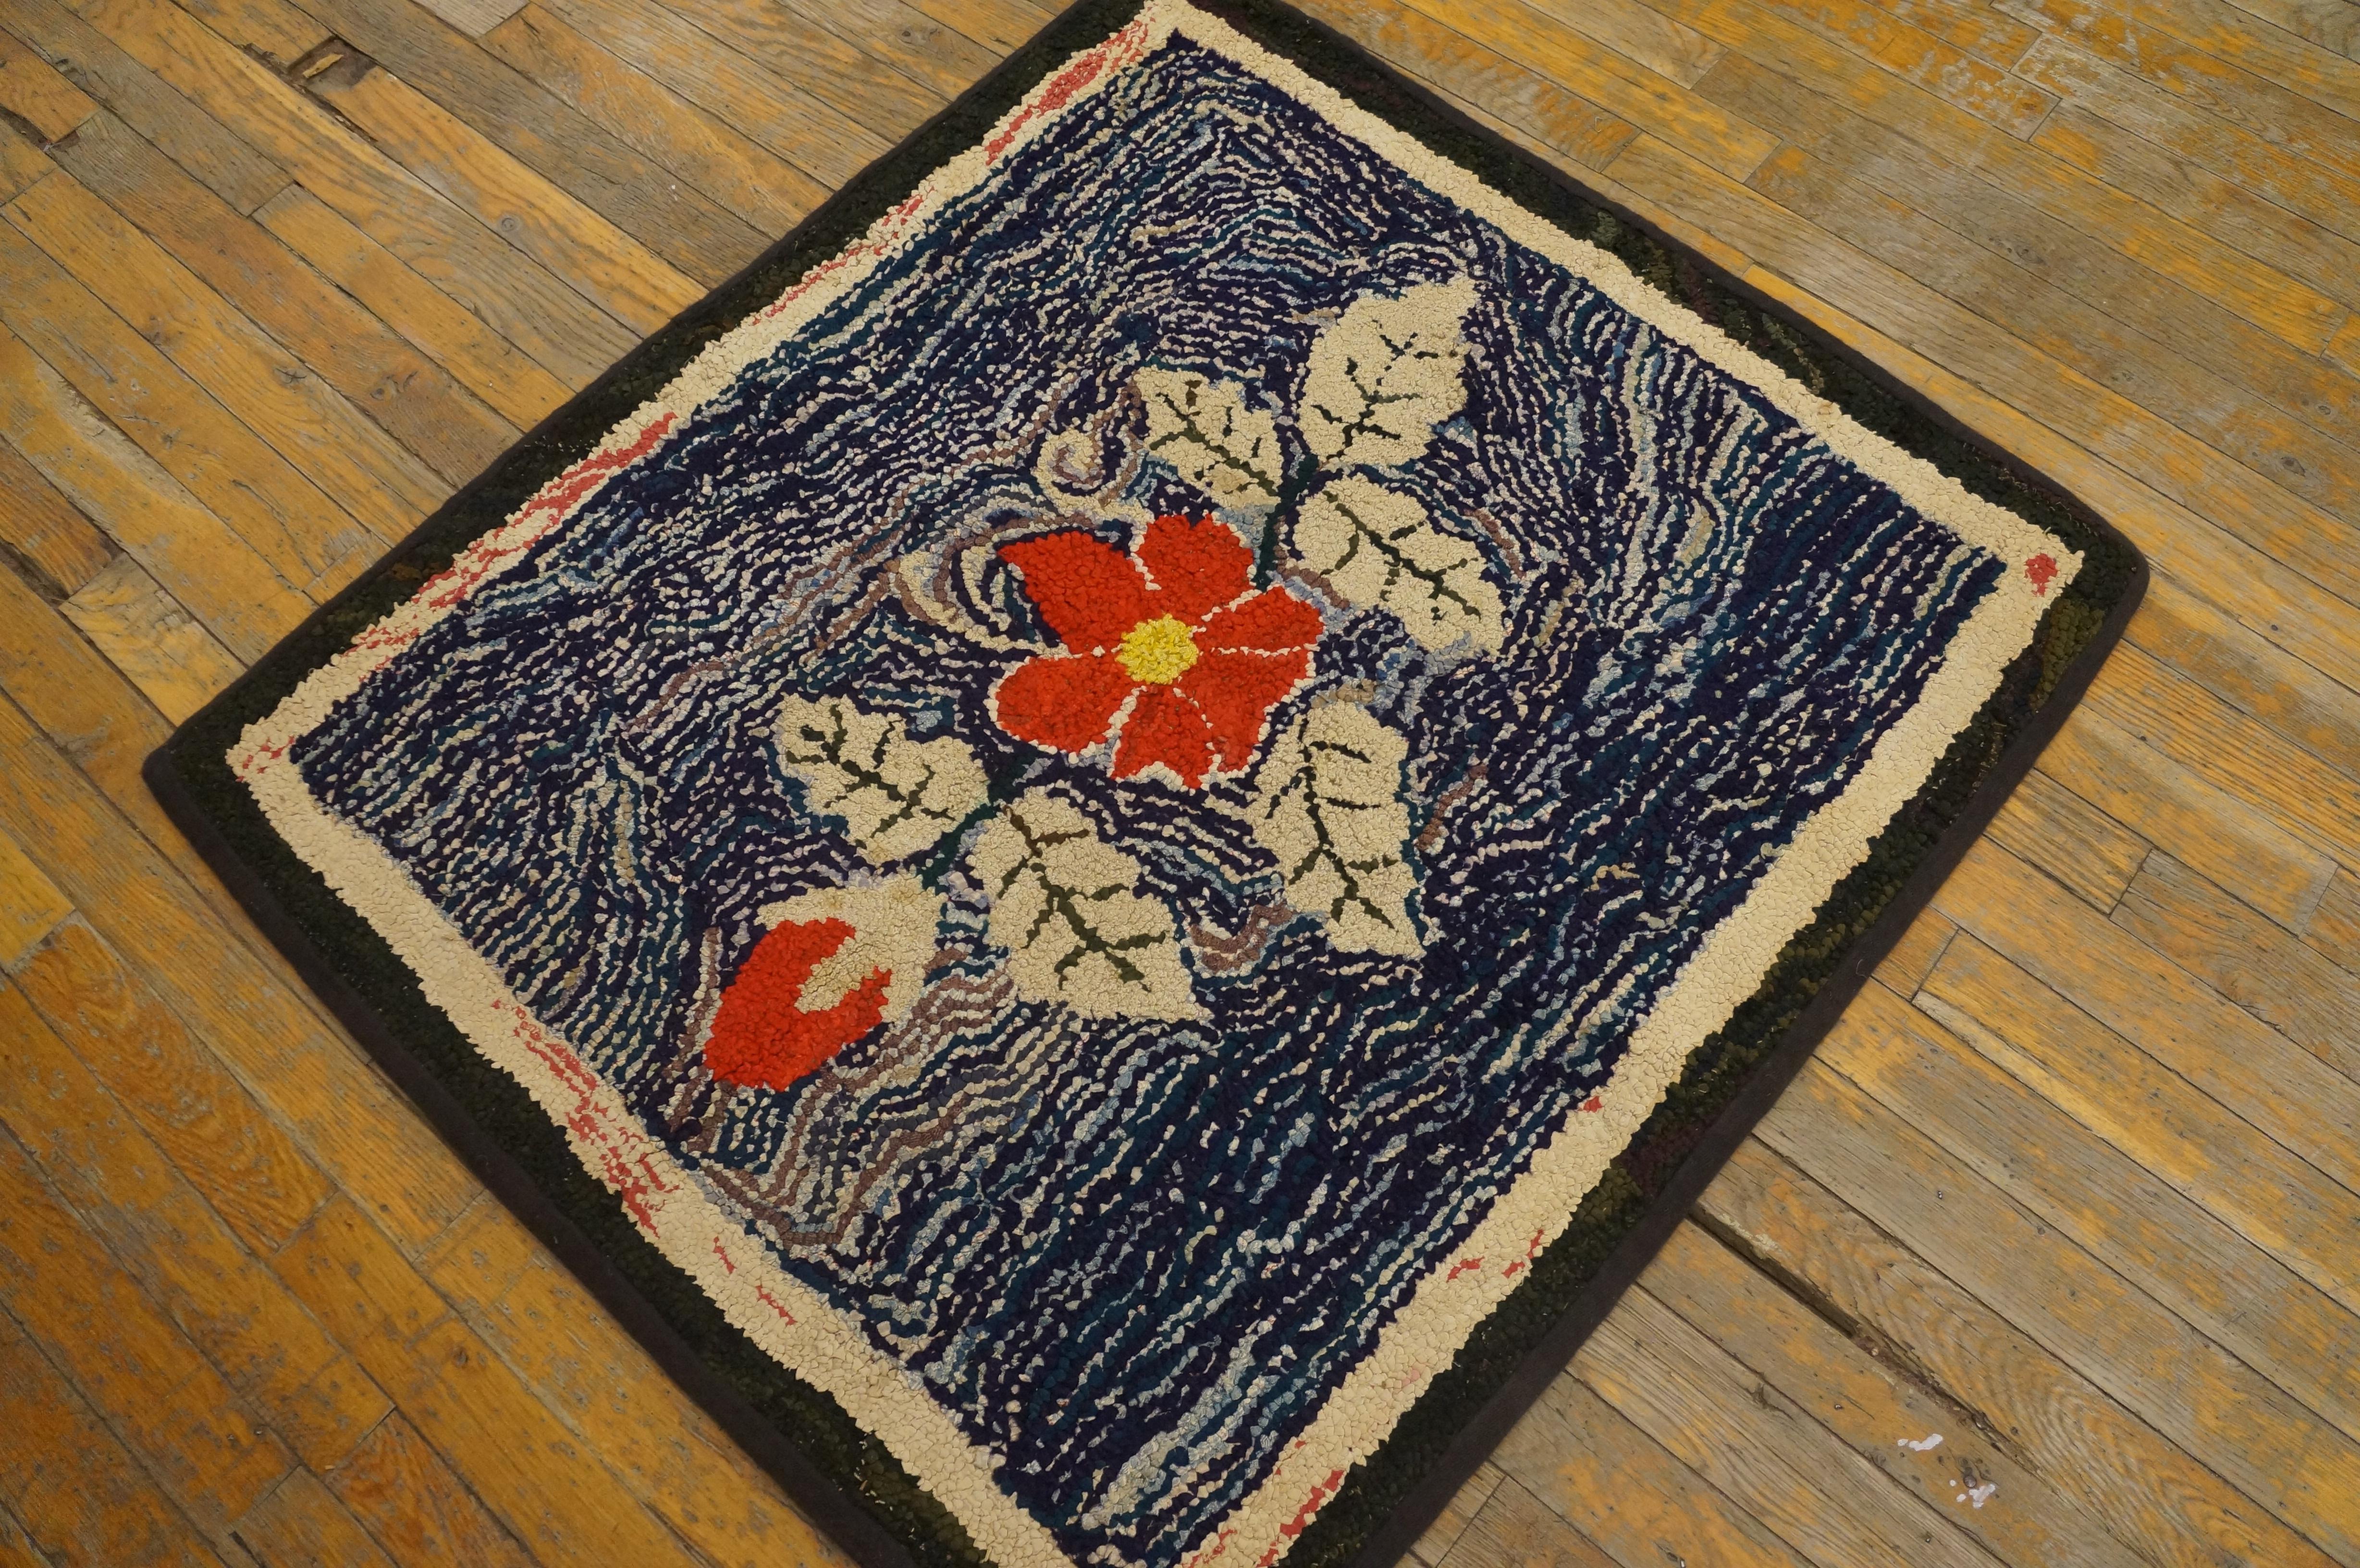 Antique American hooked rug, size: 2'10